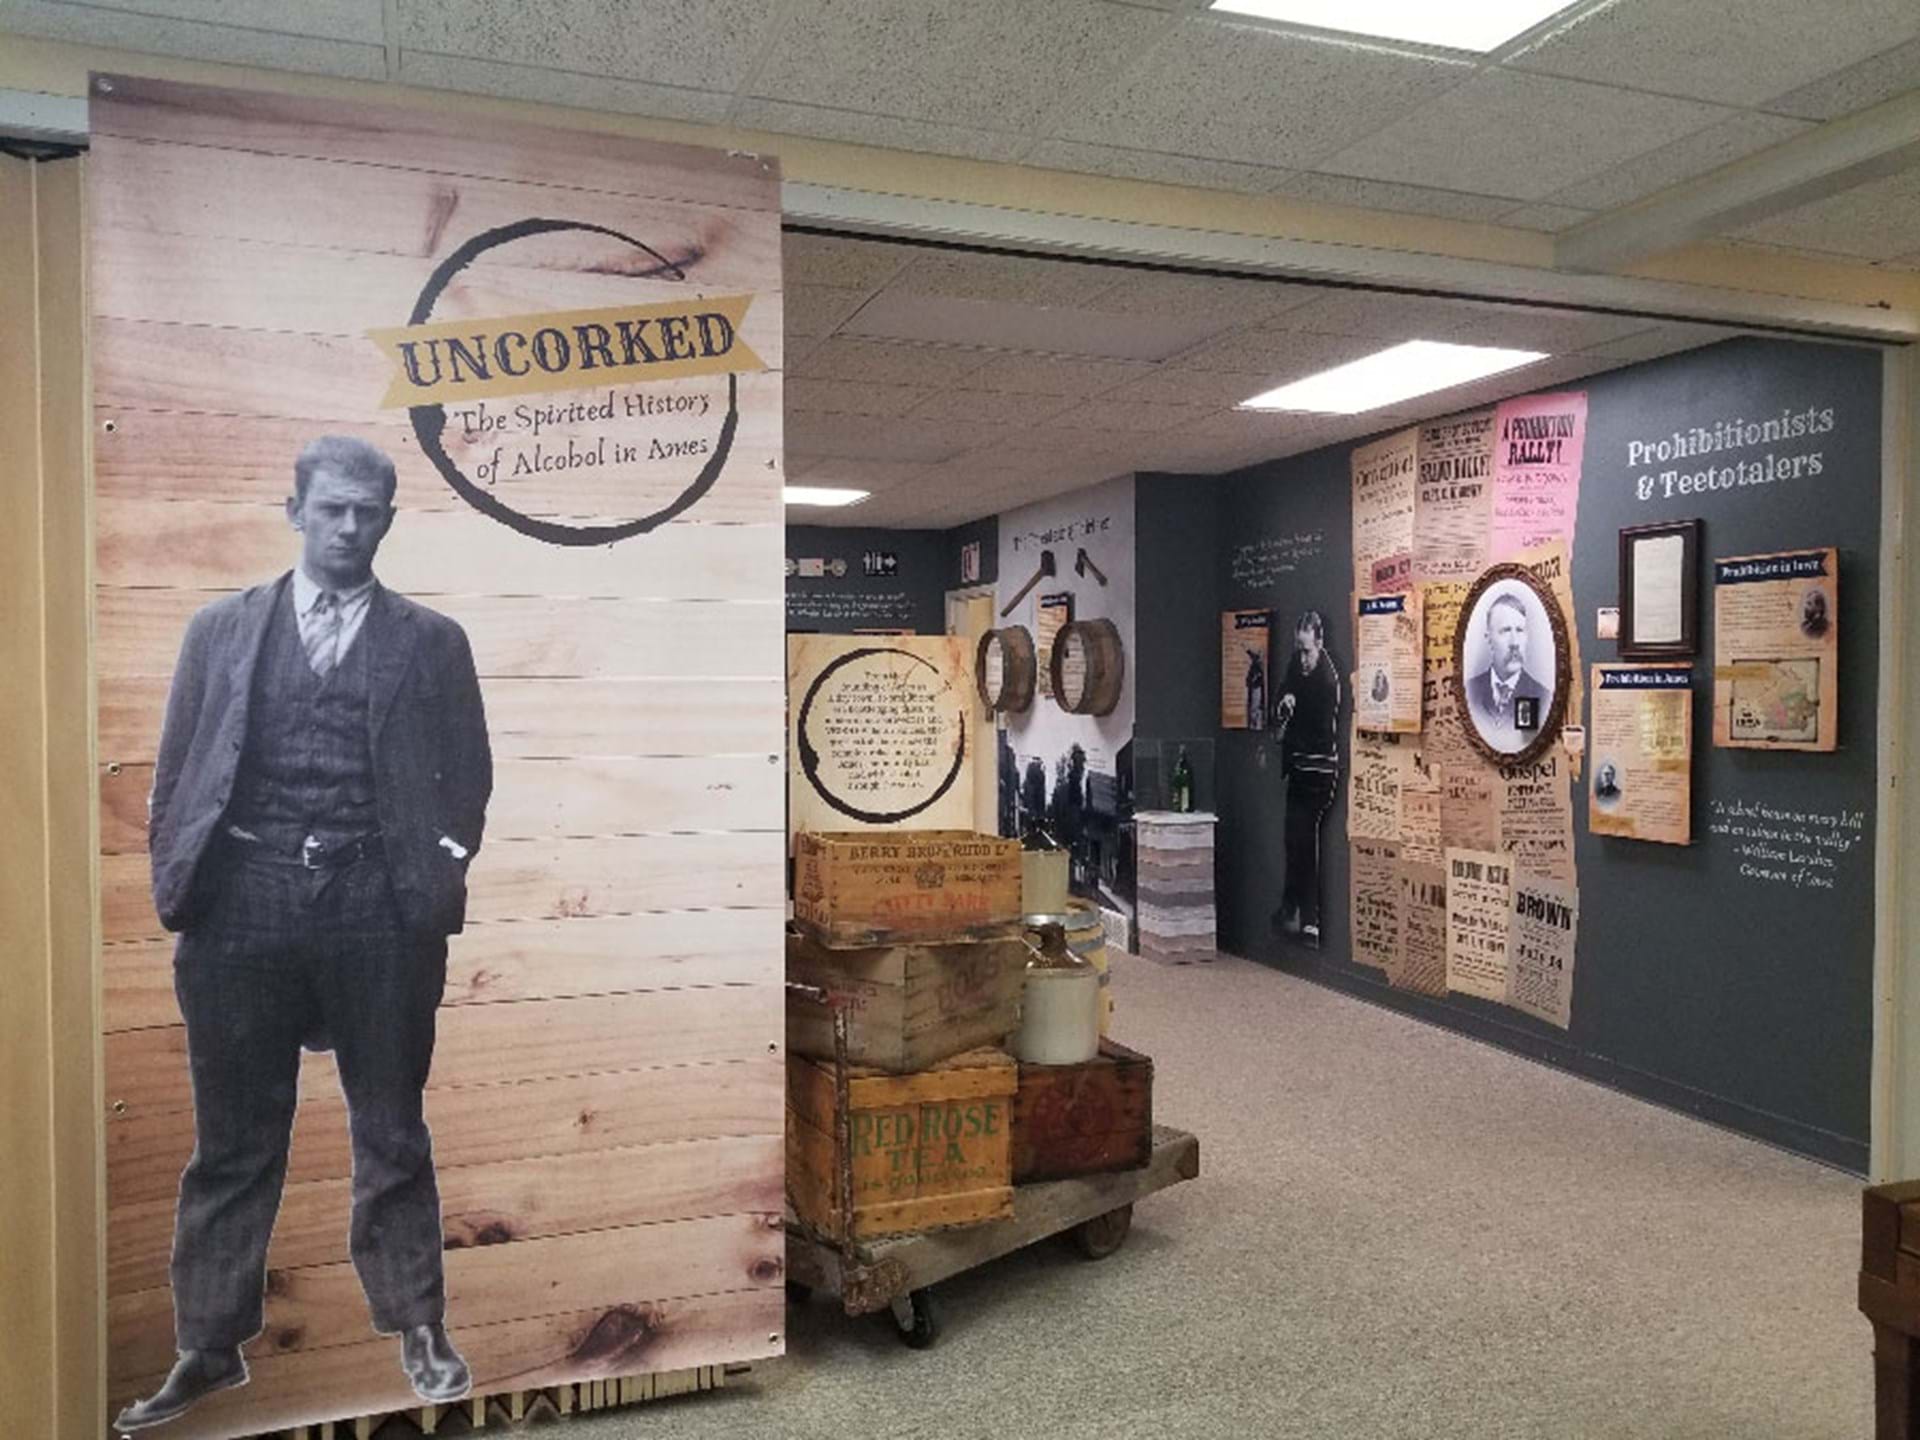 Uncorked exhibit at the Ames History Museum